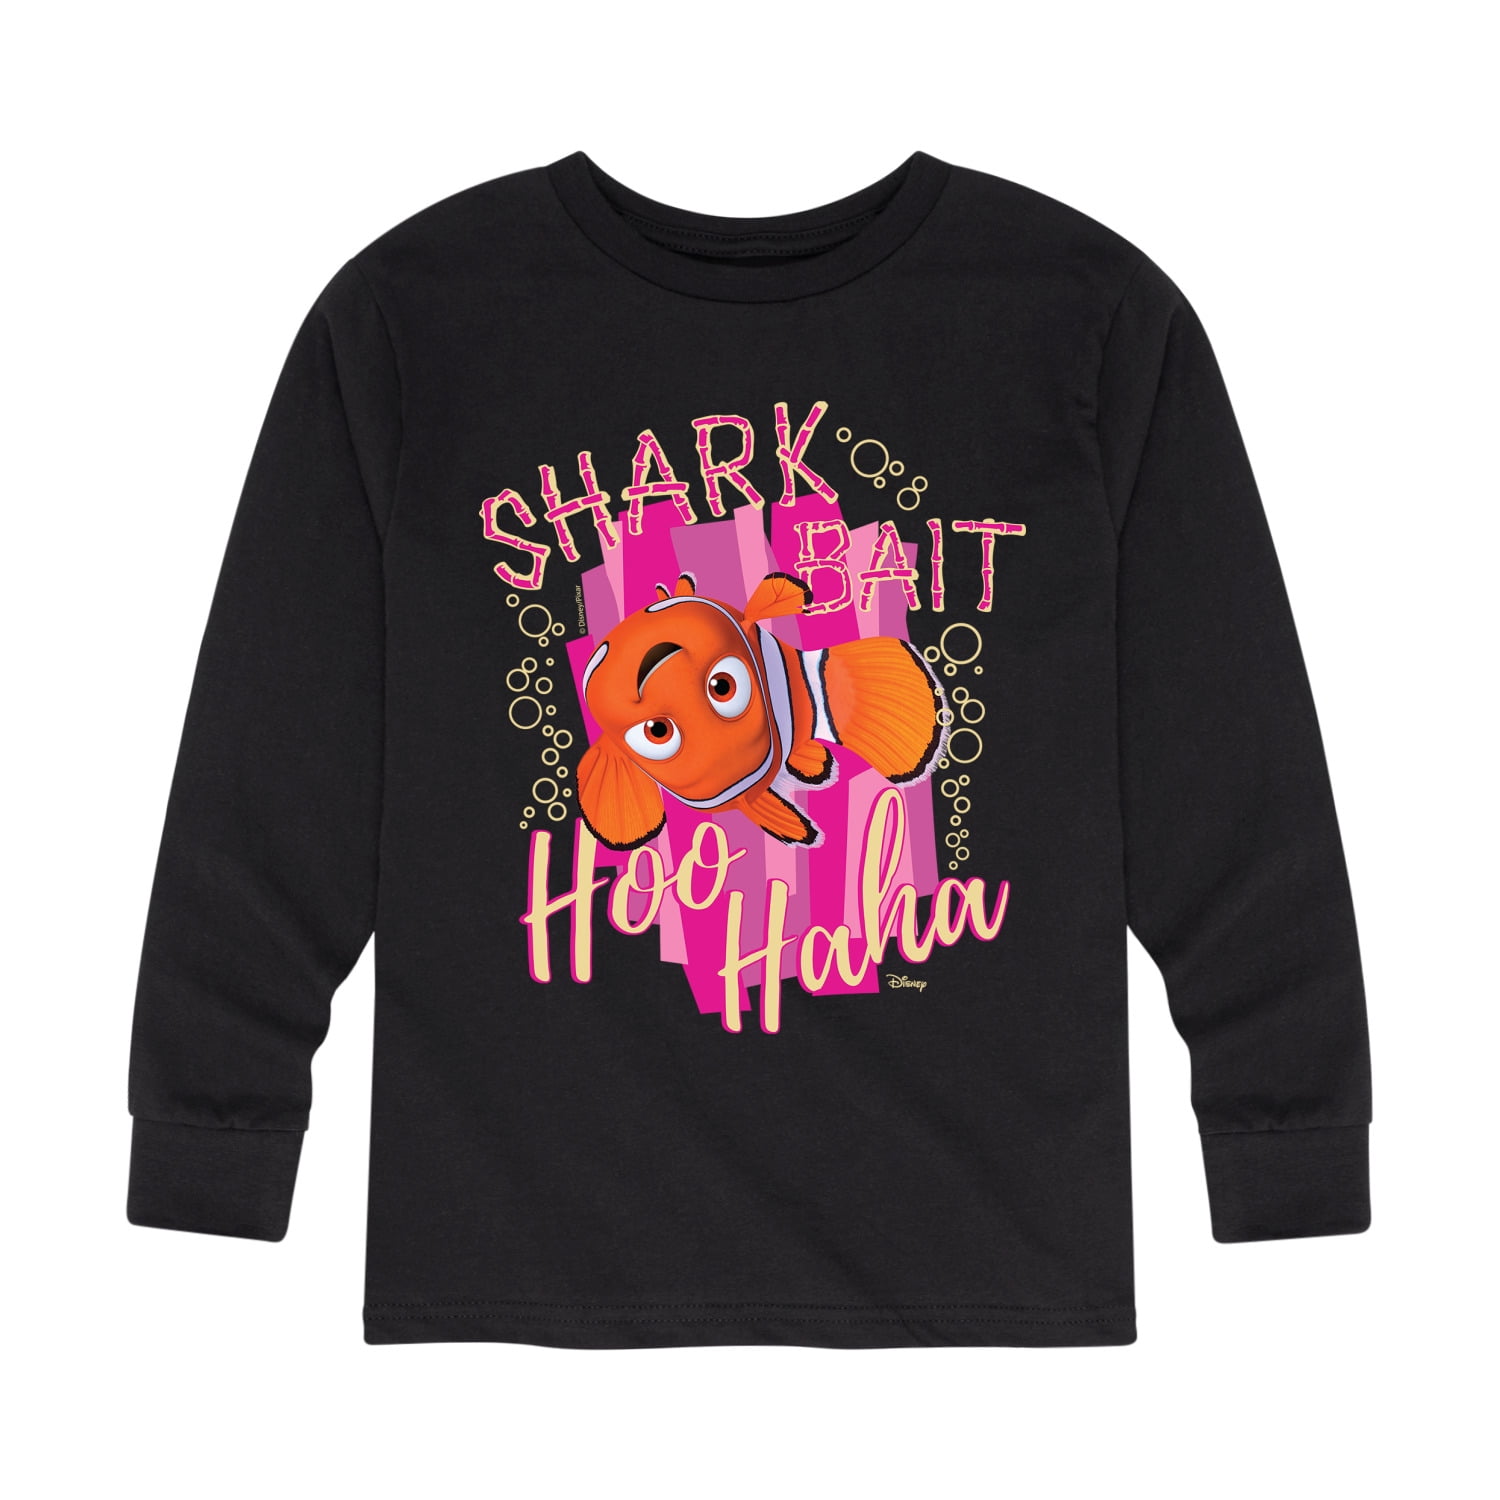 Finding Nemo - Shark Bait Hoo Haha - Toddler And Youth Long Sleeve Graphic  T-Shirt 